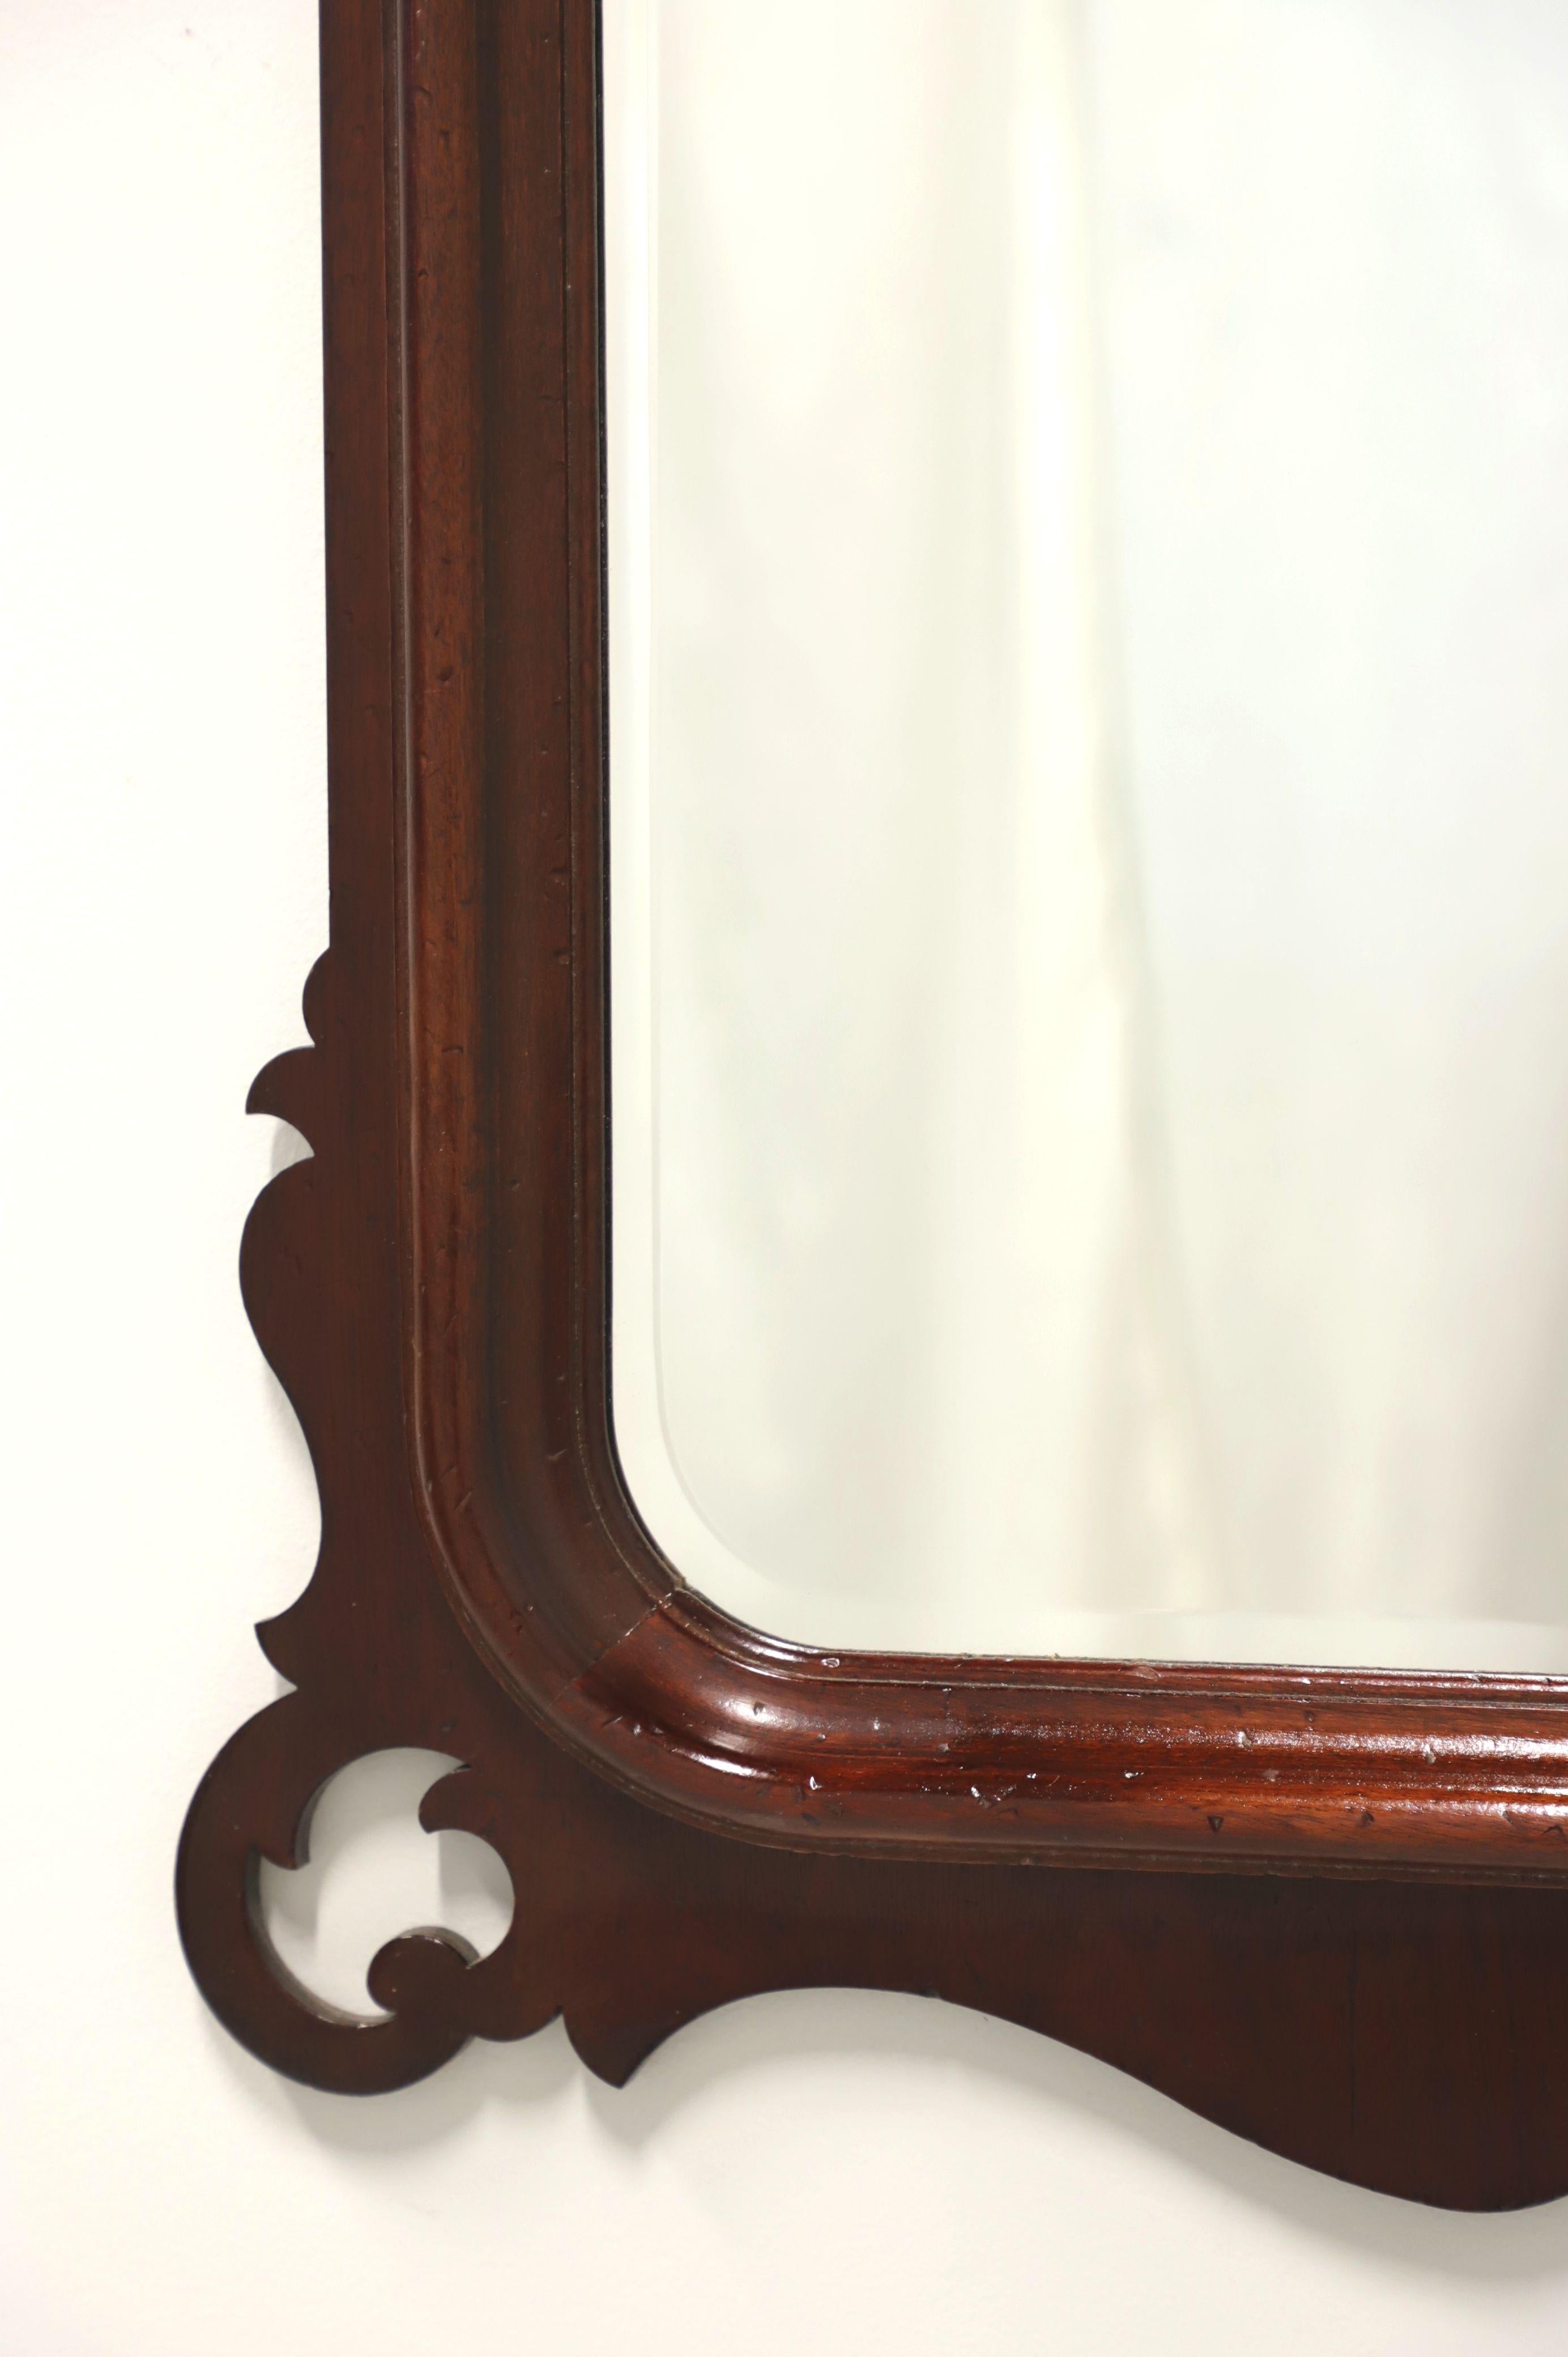 LEXINGTON Distressed Mahogany Chippendale Style Wall Mirror 1